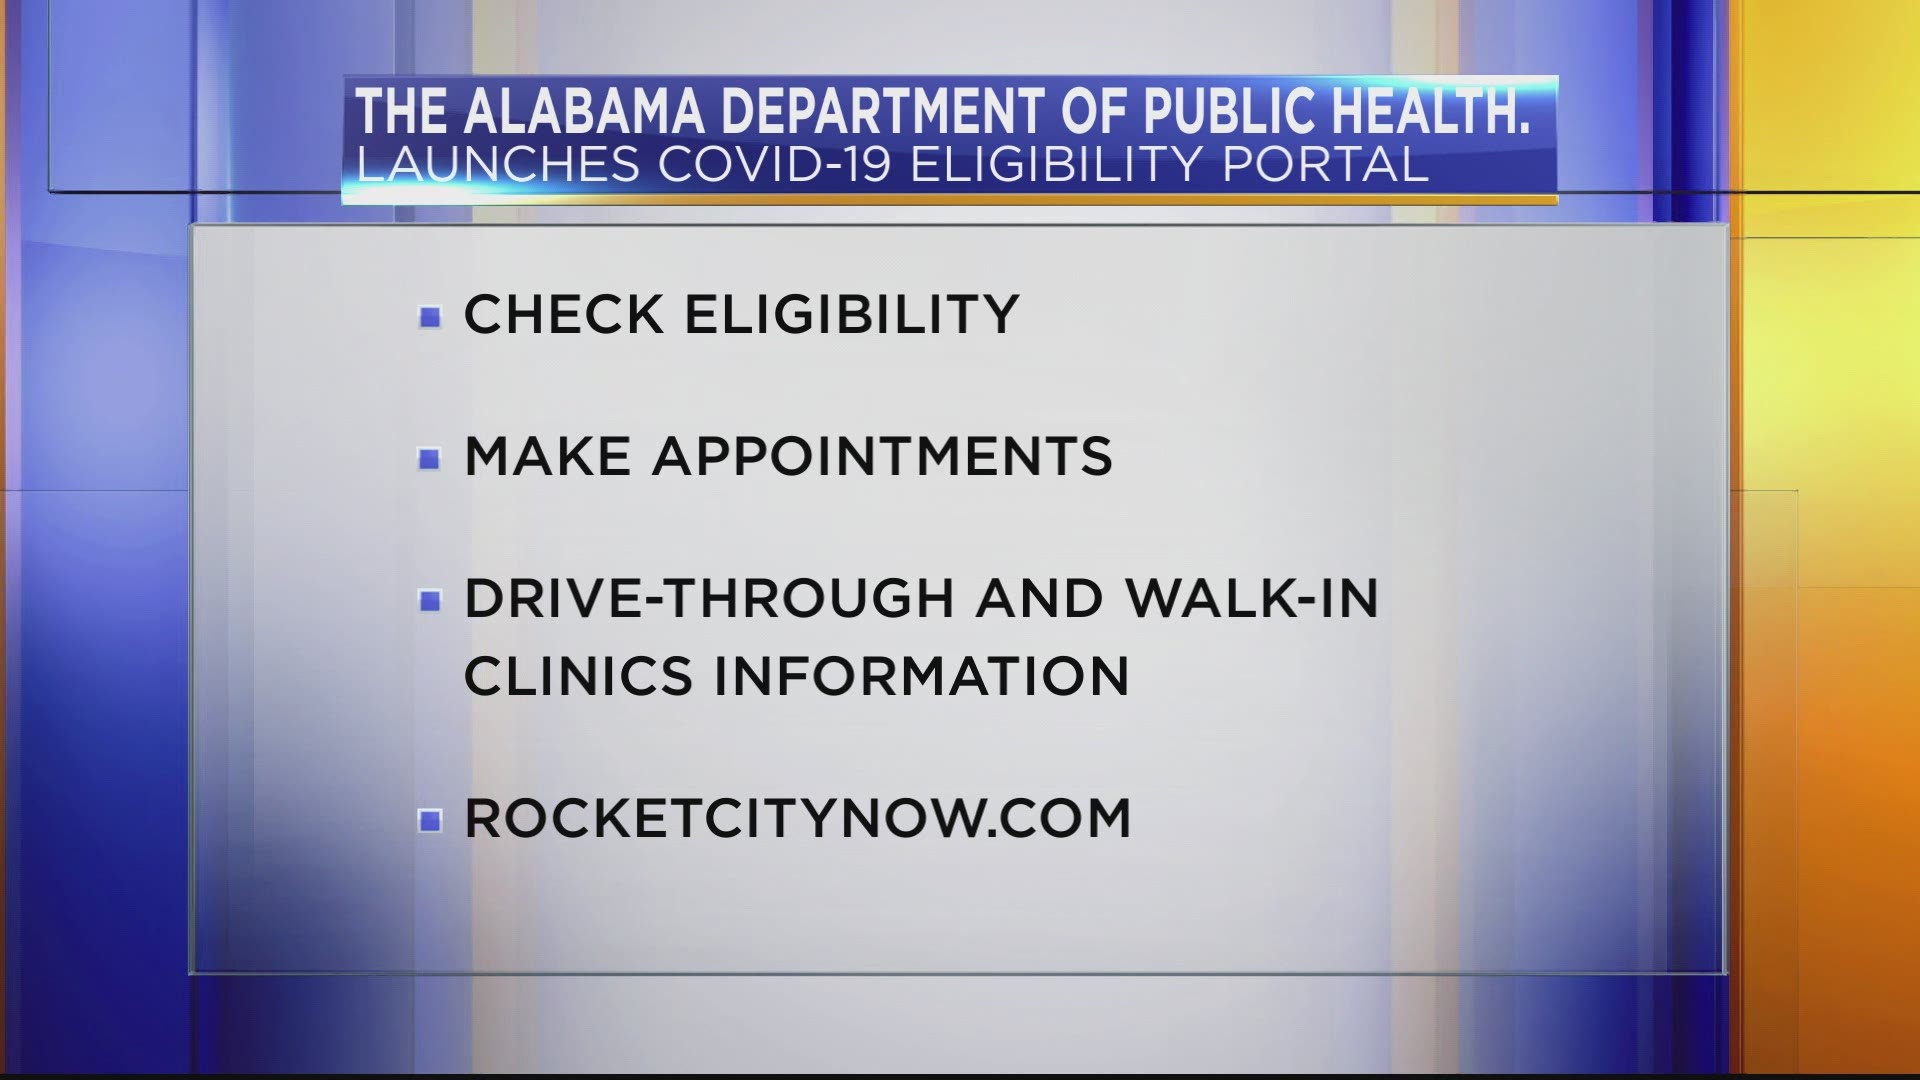 The new portal allows Alabamians to check their COVID vaccine eligibility status and schedule appointments.